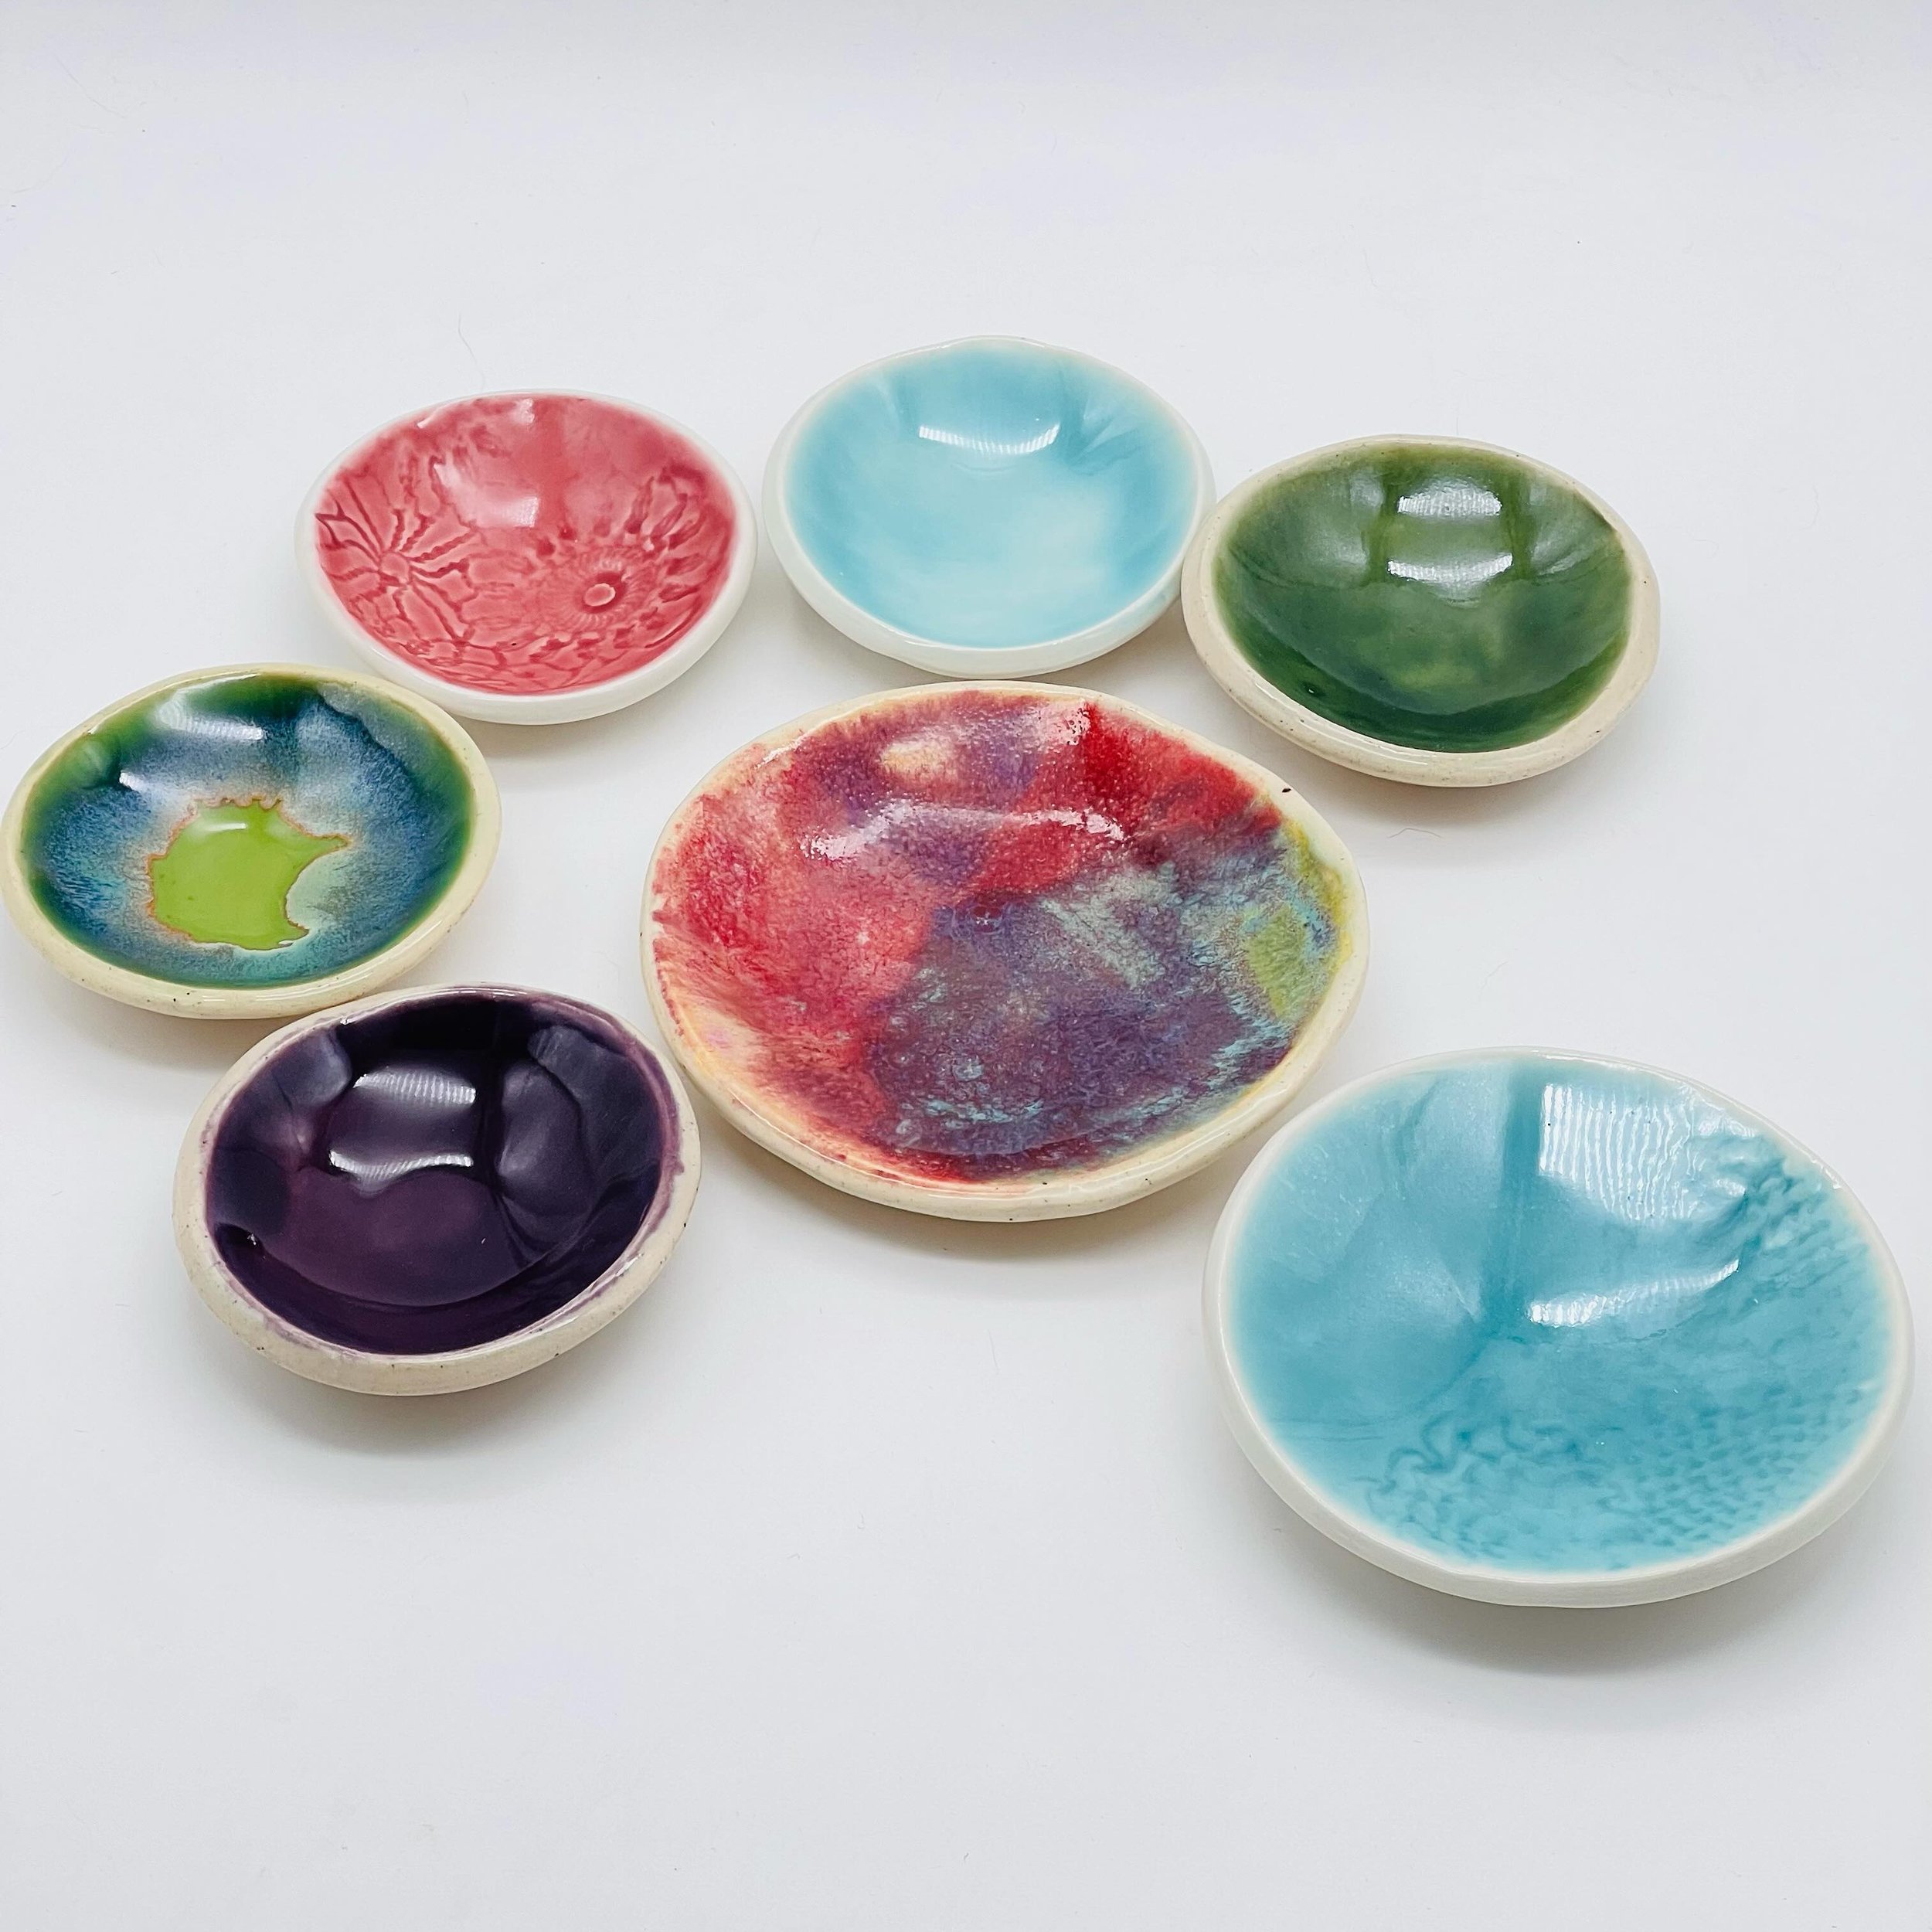 I was surprised at how popular these little dishes were at my last market. Folks loved them! 
.
.
.
#tinydishes #smalldish #smallbowl #smallbowls #trinketdish #trinketdishes #handmadedishes #handmadedish #ceramicdish #ceramicdishes #jewelrydishes